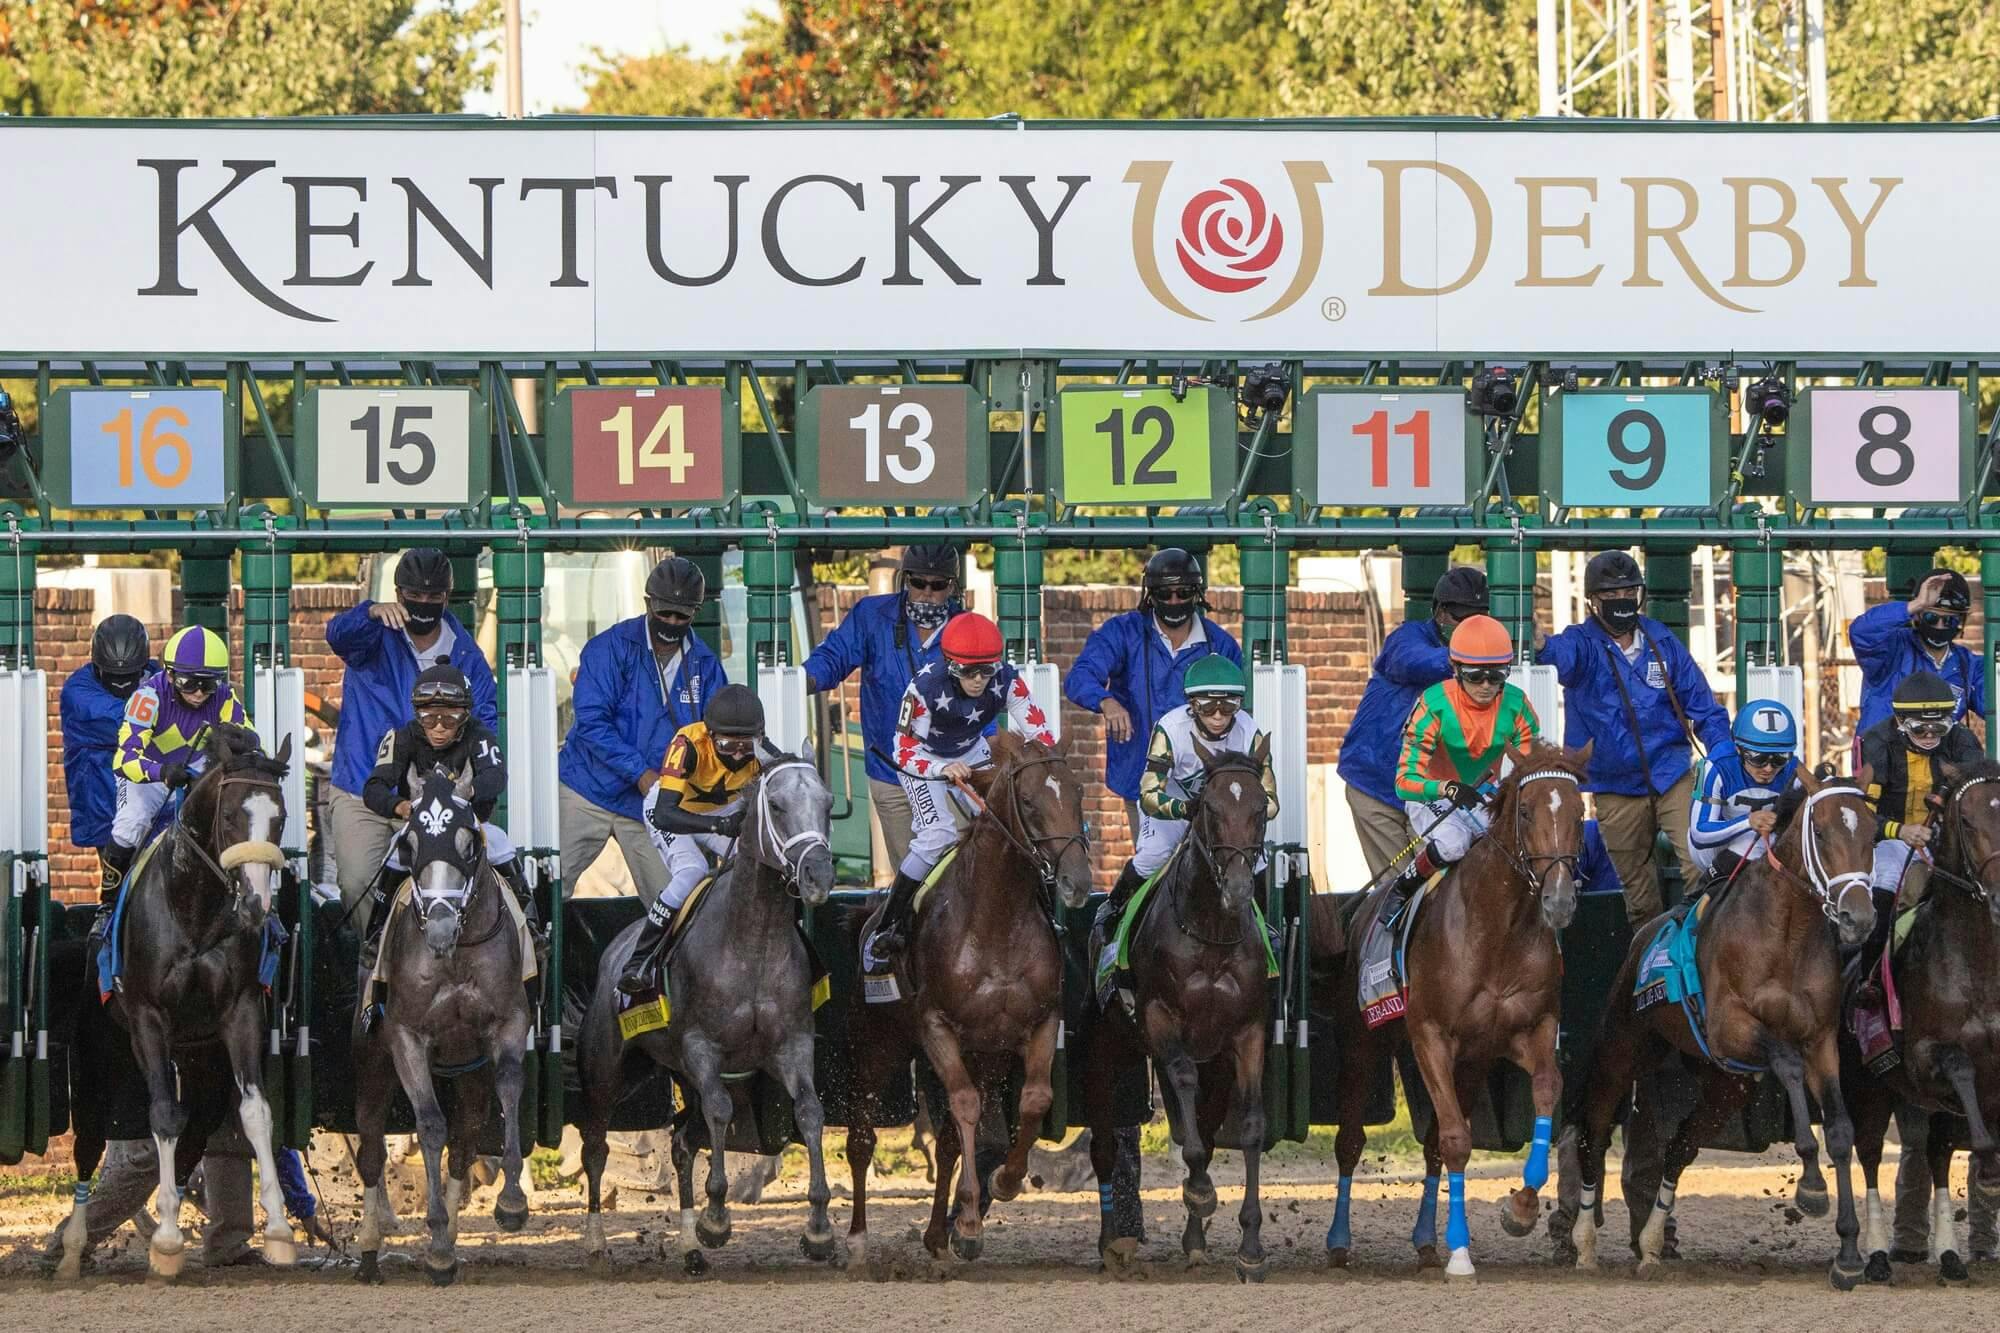 Competitors erupt from the starting gate during the running of the 146th Kentucky Derby. Authentic ridden by jockey John Velazquez would go on to win the race.